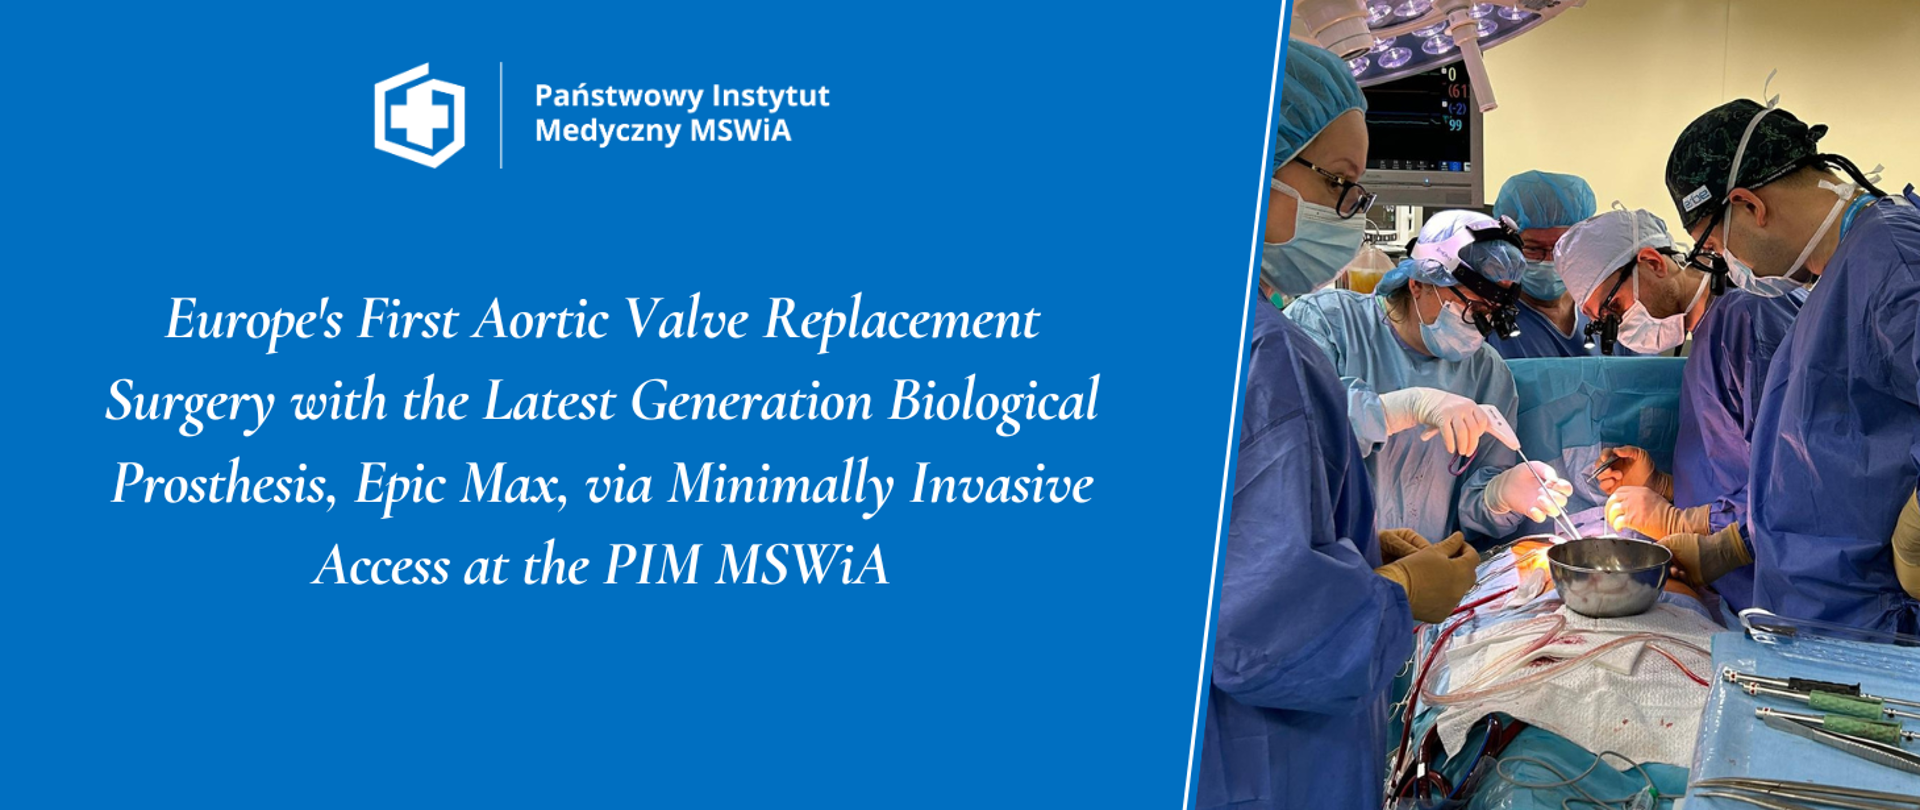 Europe's First Aortic Valve Replacement Surgery with the Latest Generation Biological Prosthesis, Epic Max, via Minimally Invasive Access at the PIM MSWiA